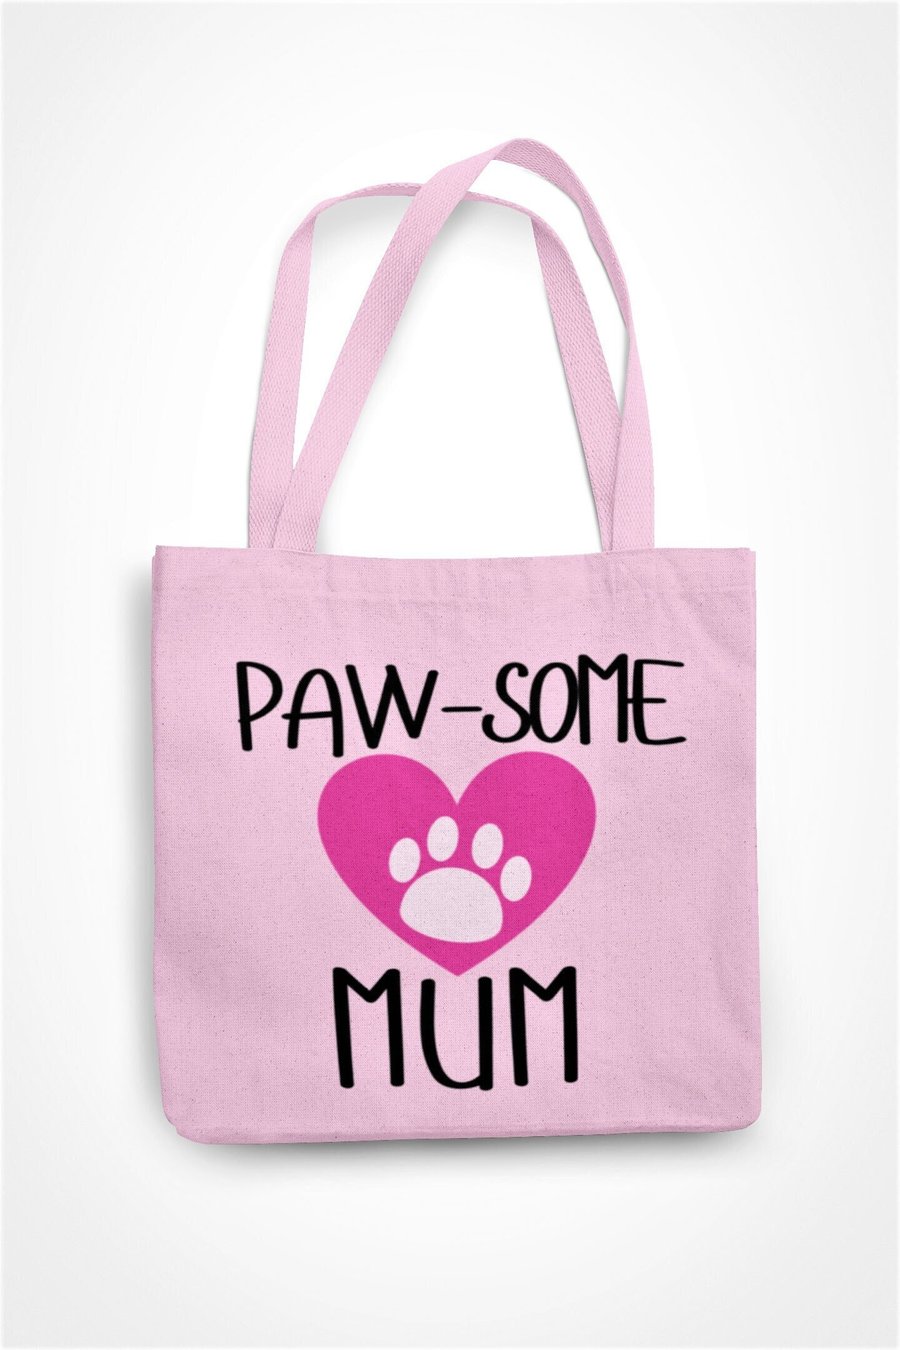 Paw-Some Mum Tote Bag Mothers Day Birthday Christmas Paw Cat Dog Gift